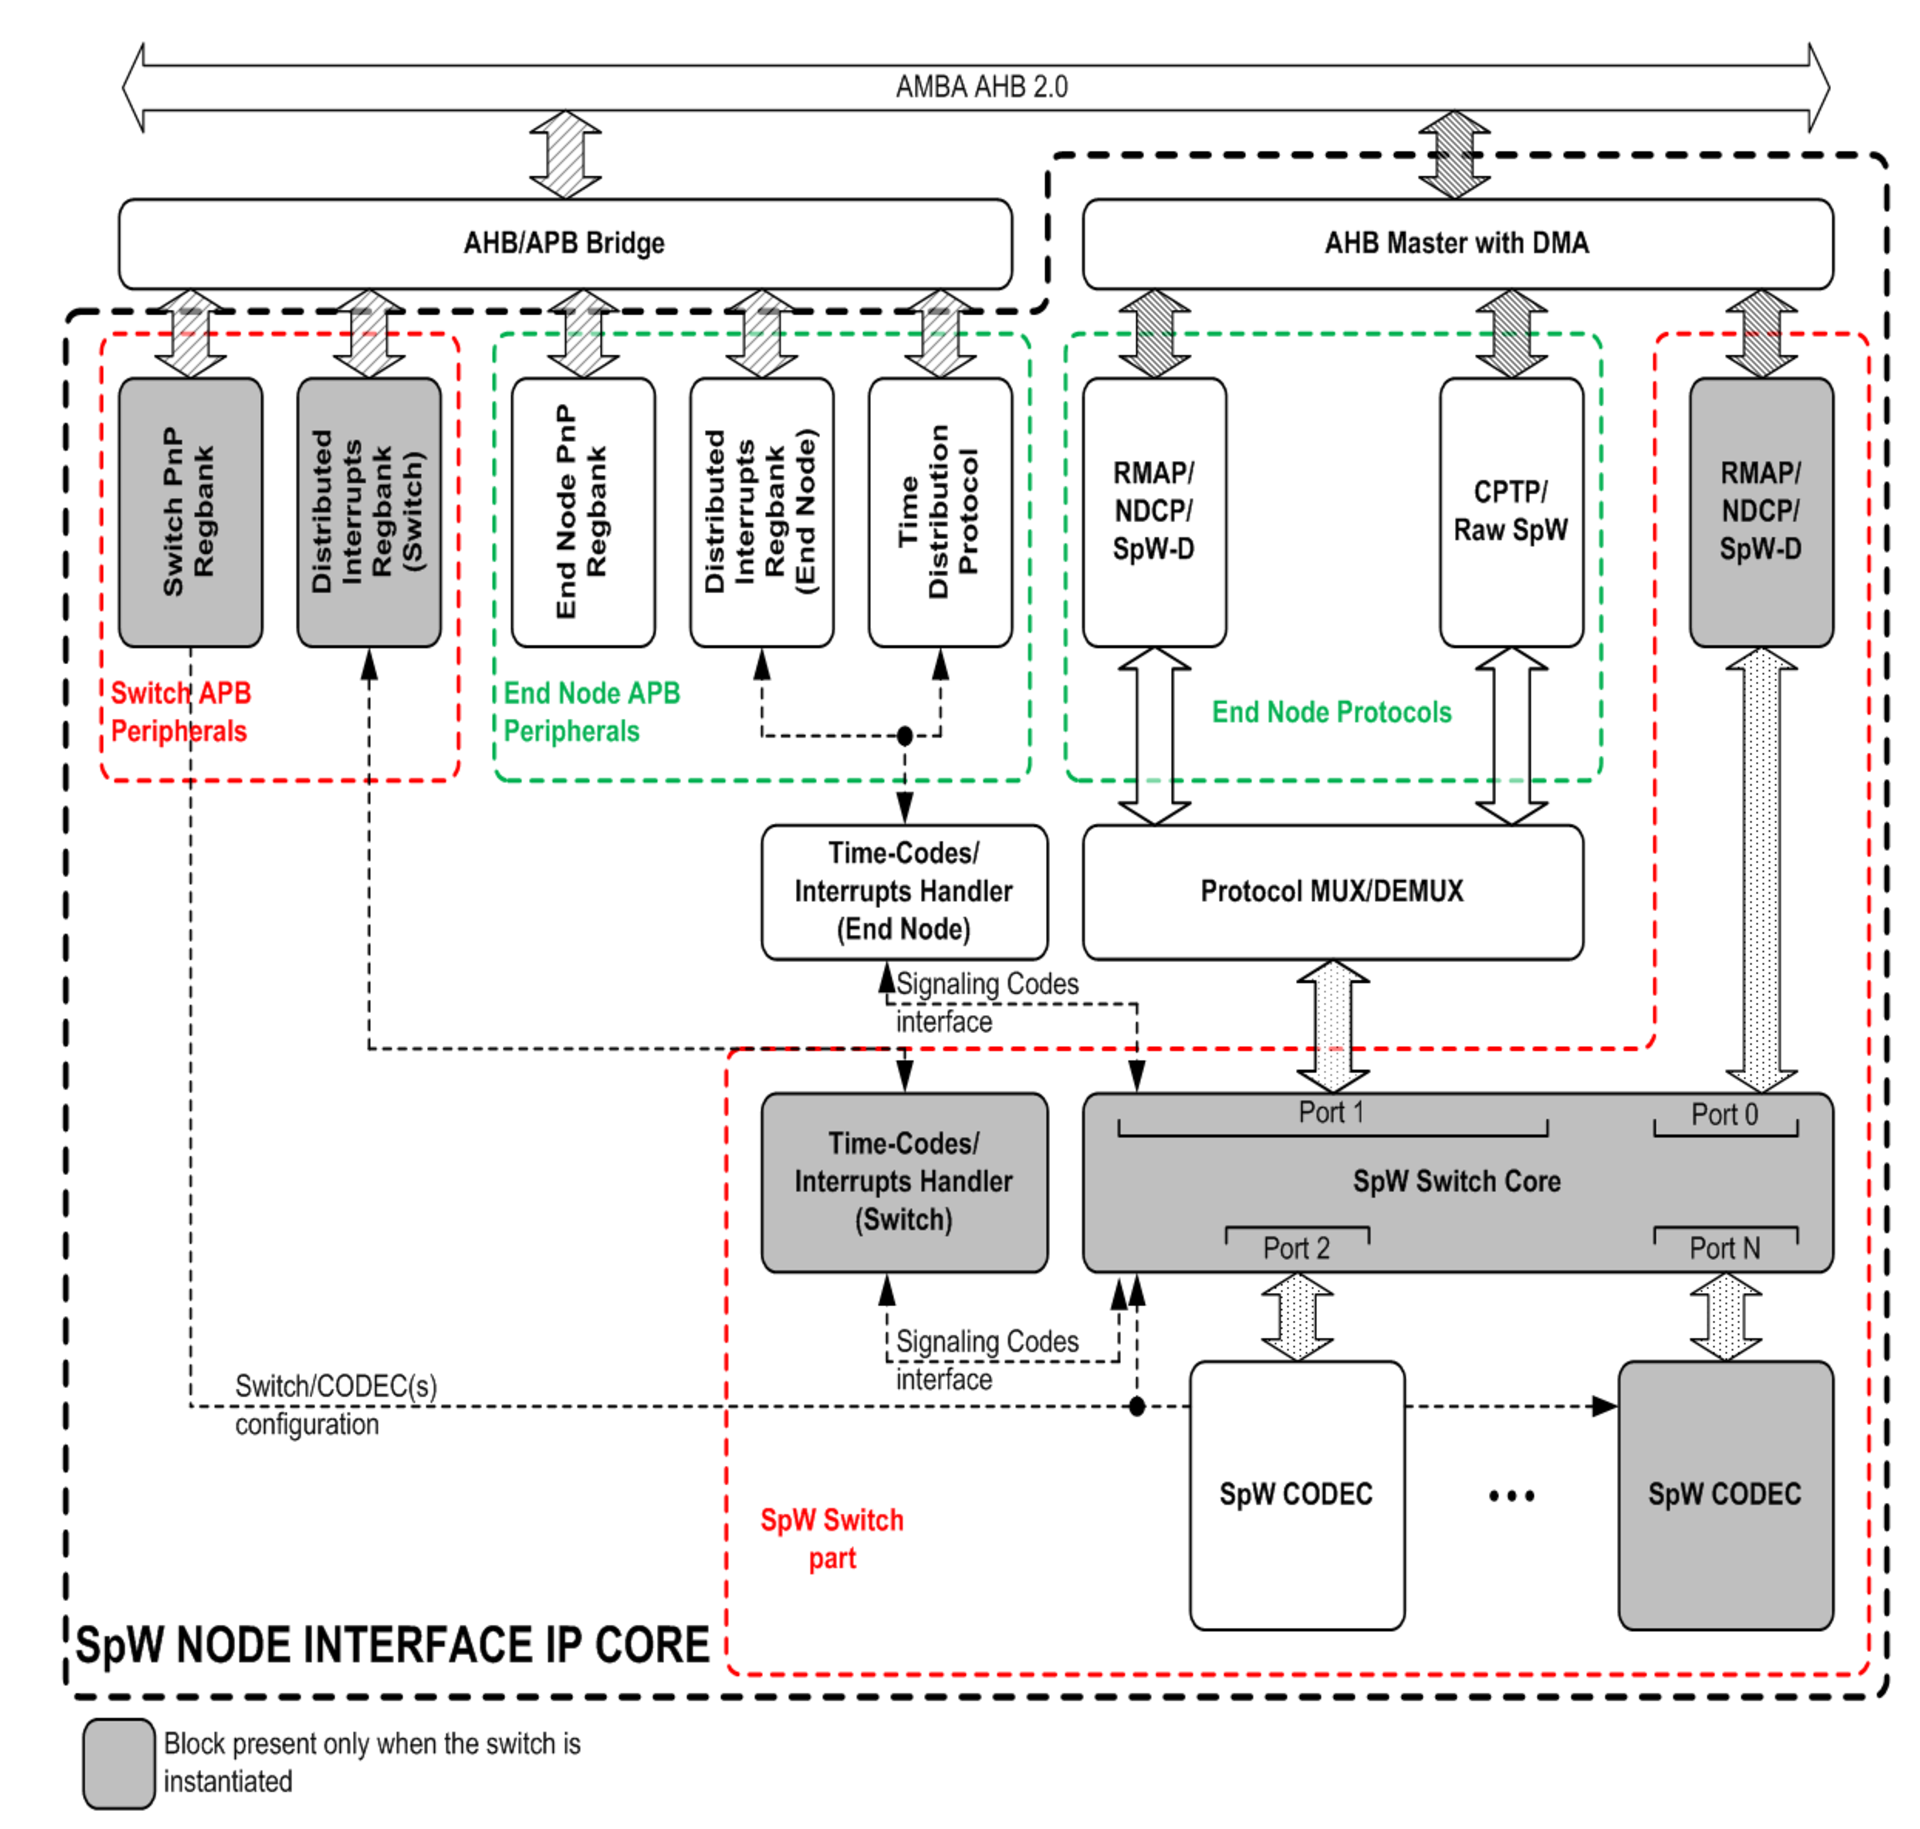 Space Wire node interface IP core